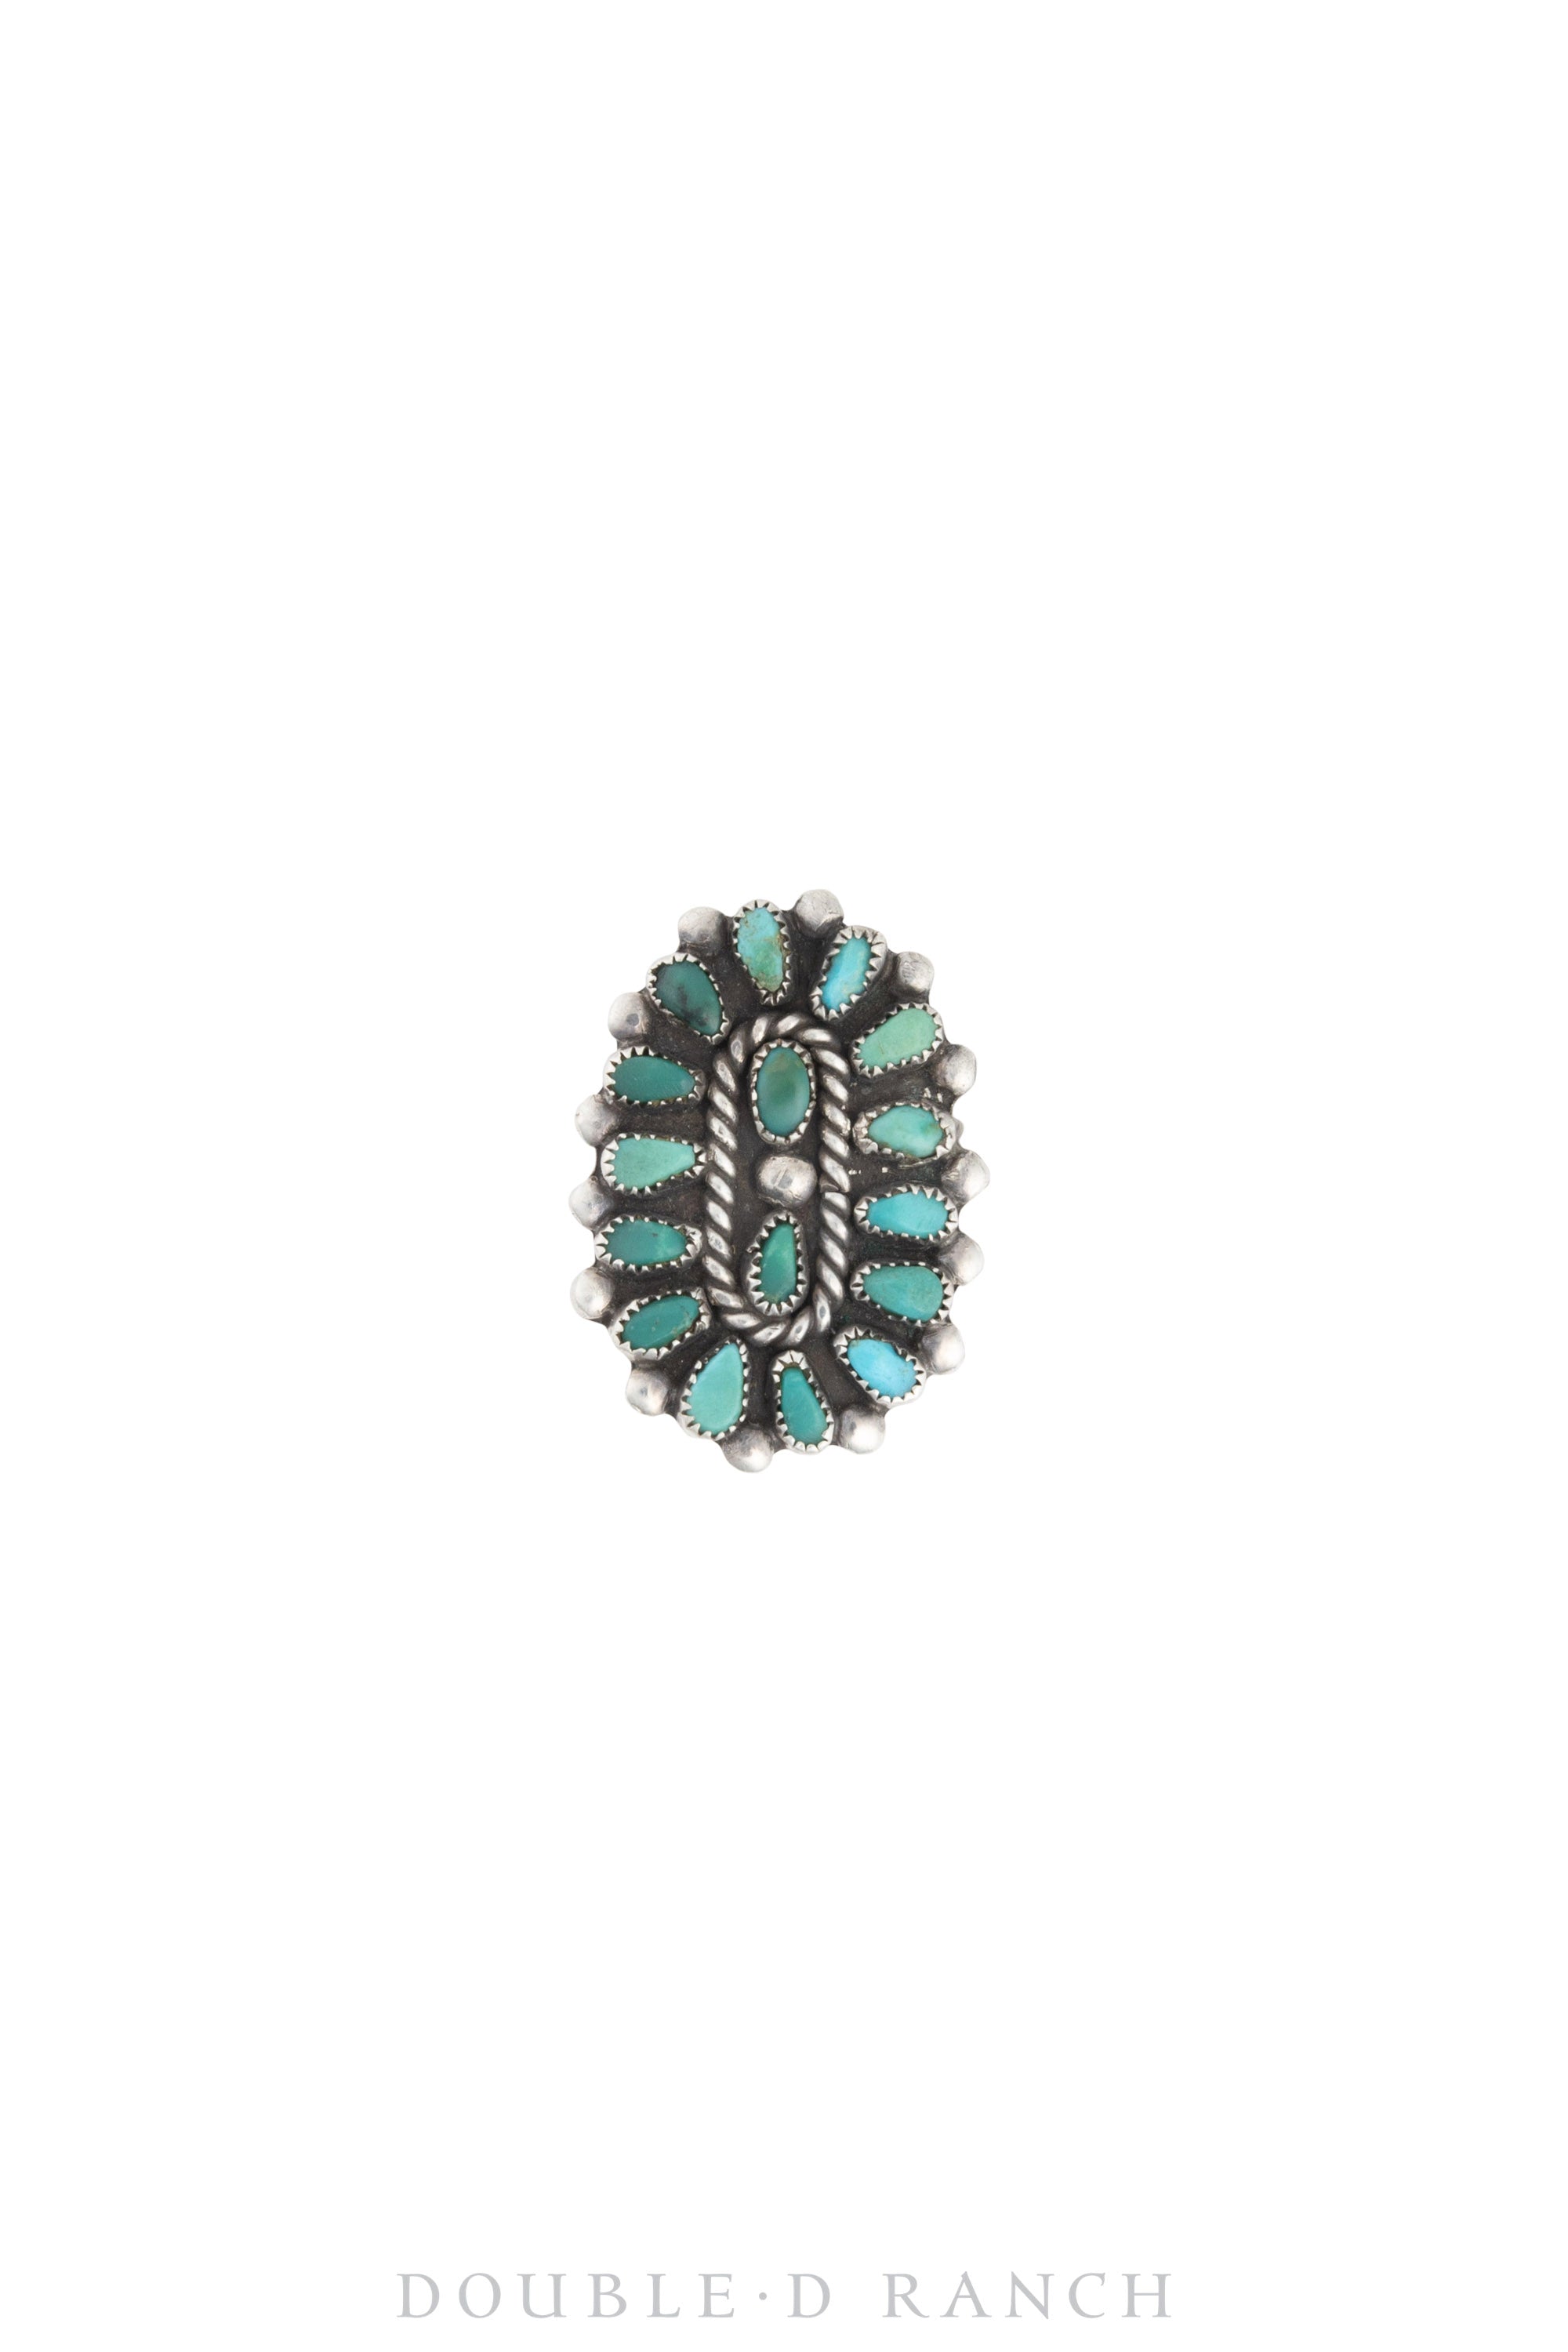 Ring, Cluster, Turquoise, Zuni, Vintage ‘40s, 1375